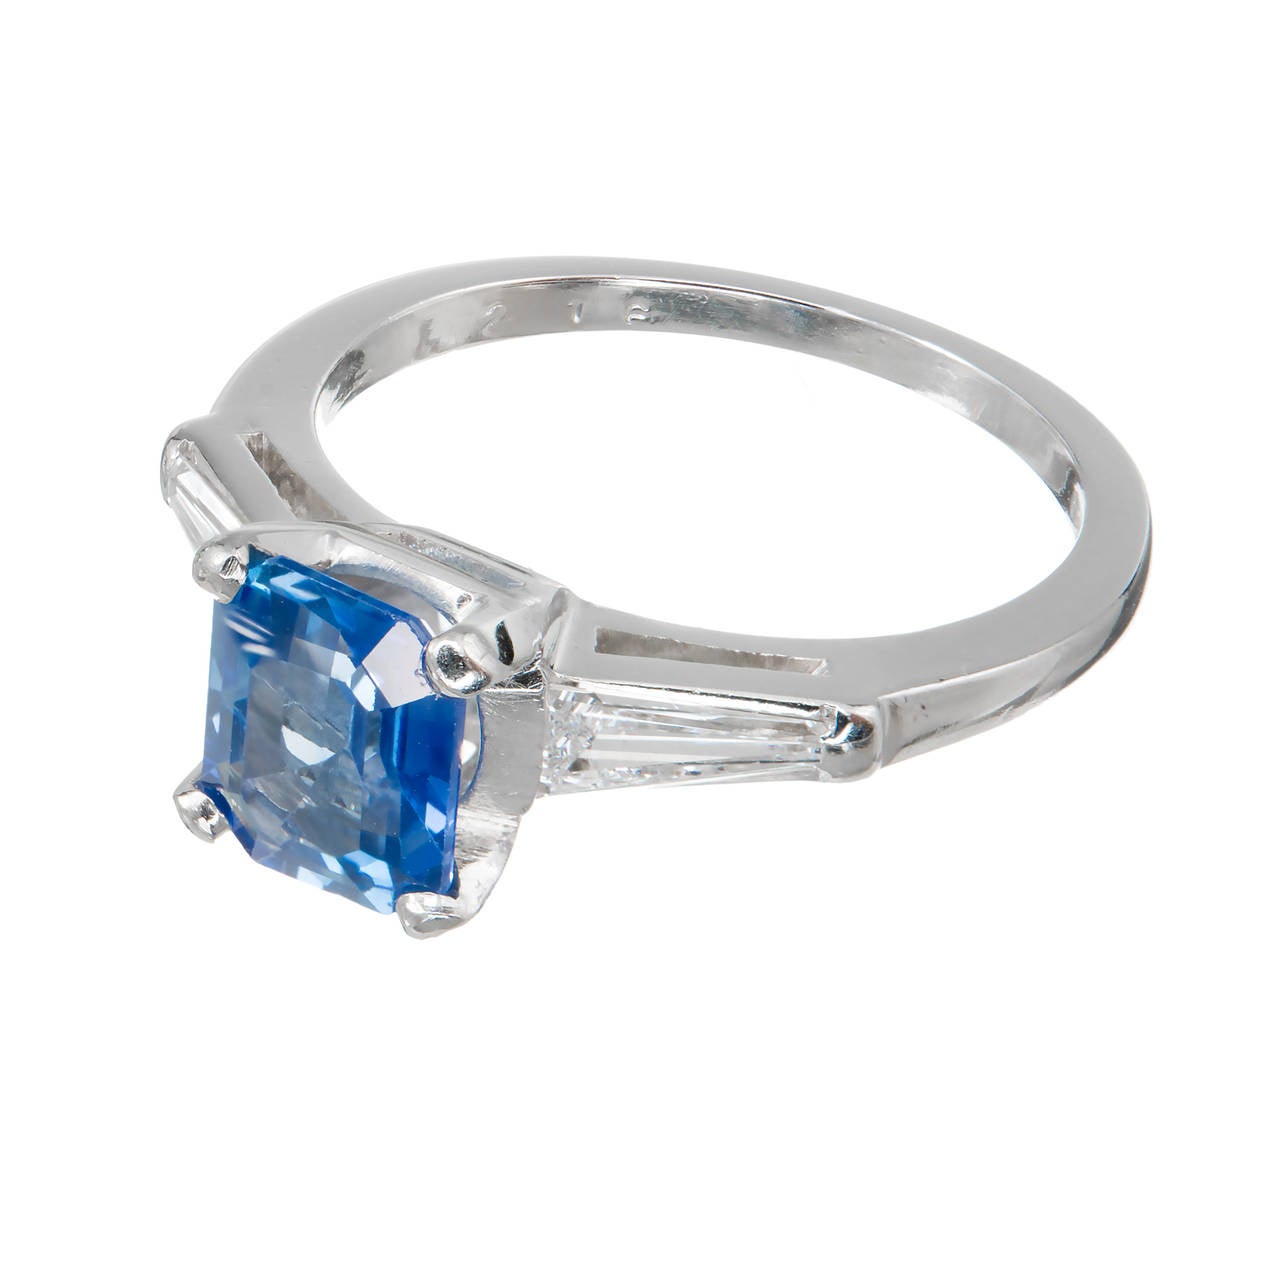 Classic style with fine diamond baguettes. Center stone removed for certificate. Rare pure bright blue color.

1 Emerald cut bright cornflower blue Sapphire, approx. total weight 1.39cts, VS, 7.09 x 5.79 x 3.32mm, natural color and simple heat